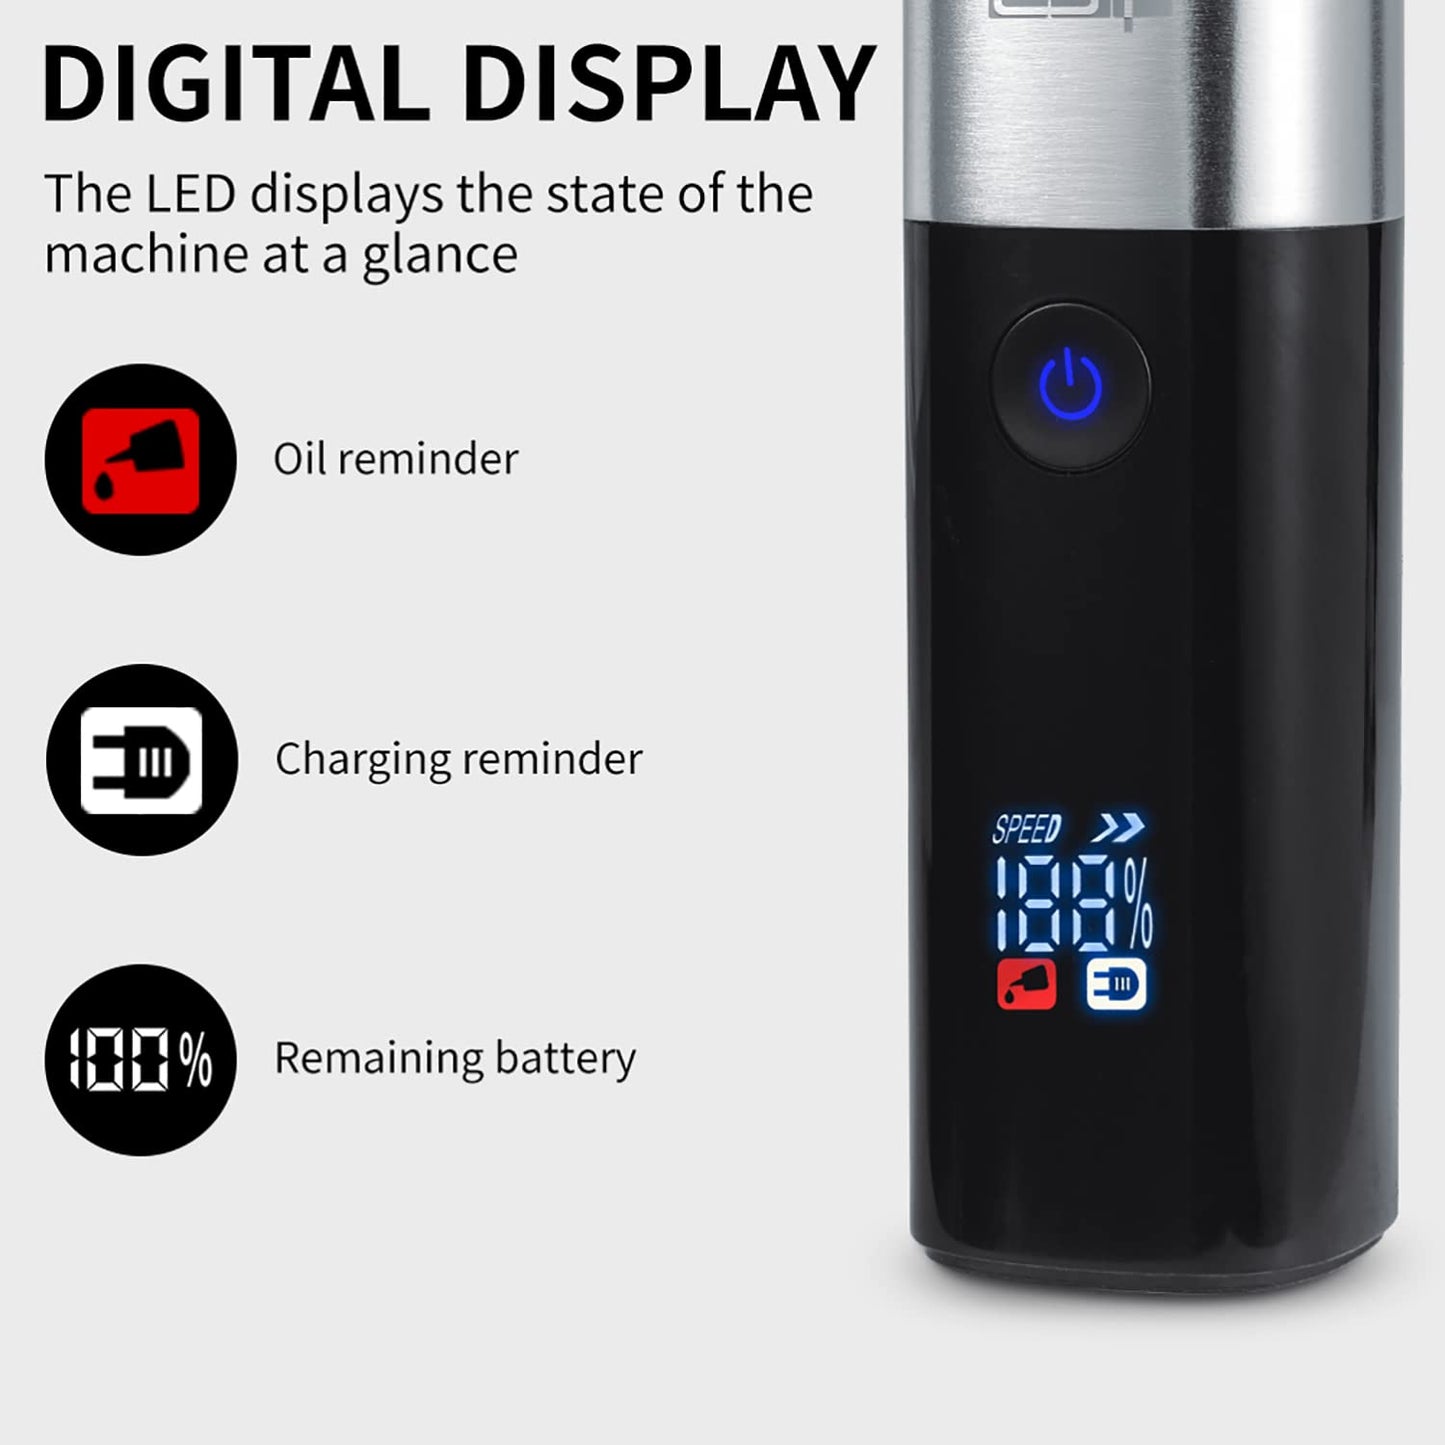 DSP IPX7 Waterproof LED Display Beard Trimmer for Men - Zero Gapped Hair Trimmer with T Outliner Blade, USB Charging, Stainless Steel Blades, Ideal Clippers for Barber Use